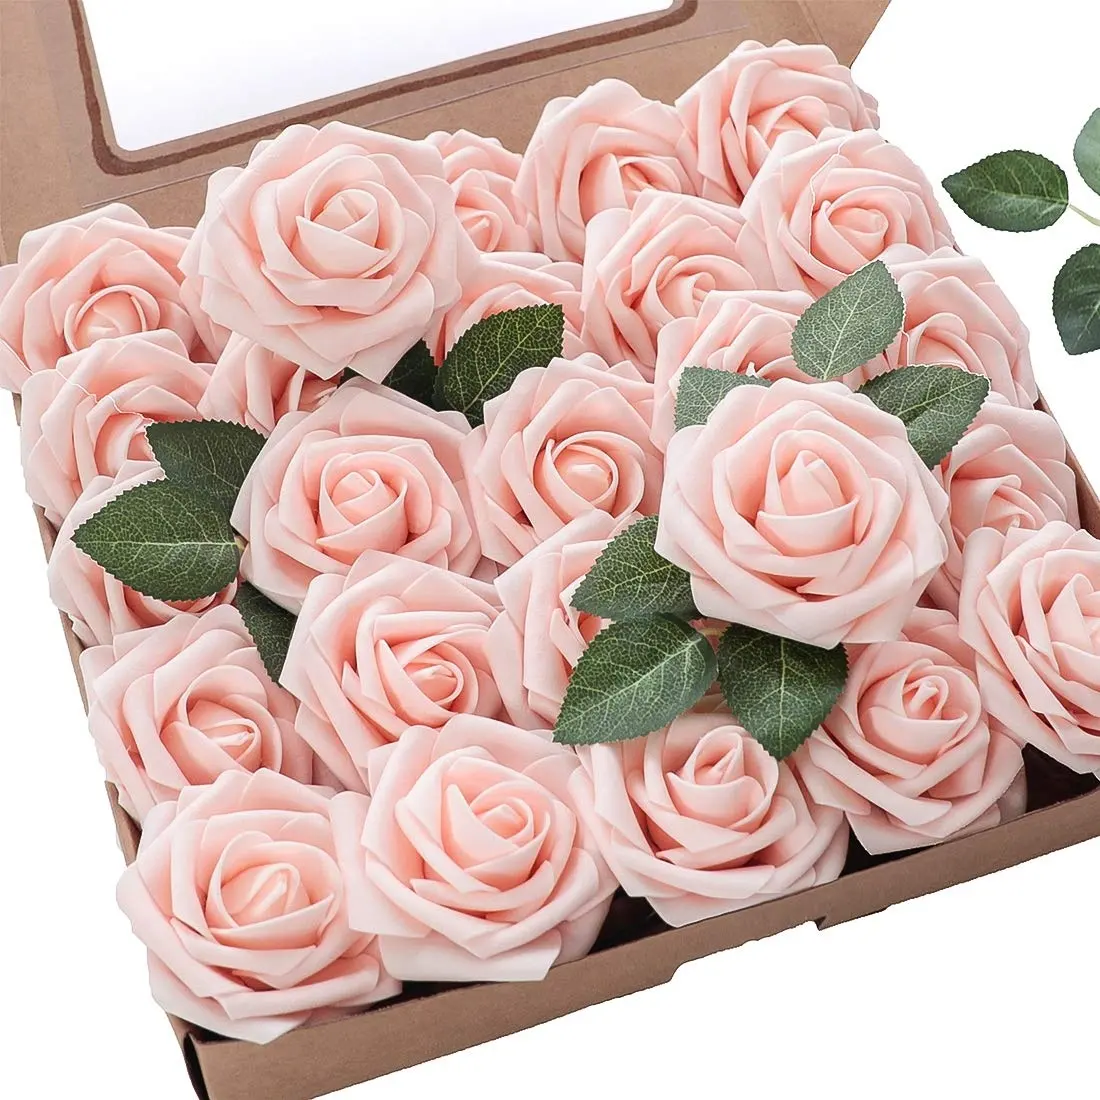 25PCS Long Stem Roses Box Artificial Roses Flowers Box Real Touch Foam Fake Rose Bulk with Stem Flores Artificial Flowers